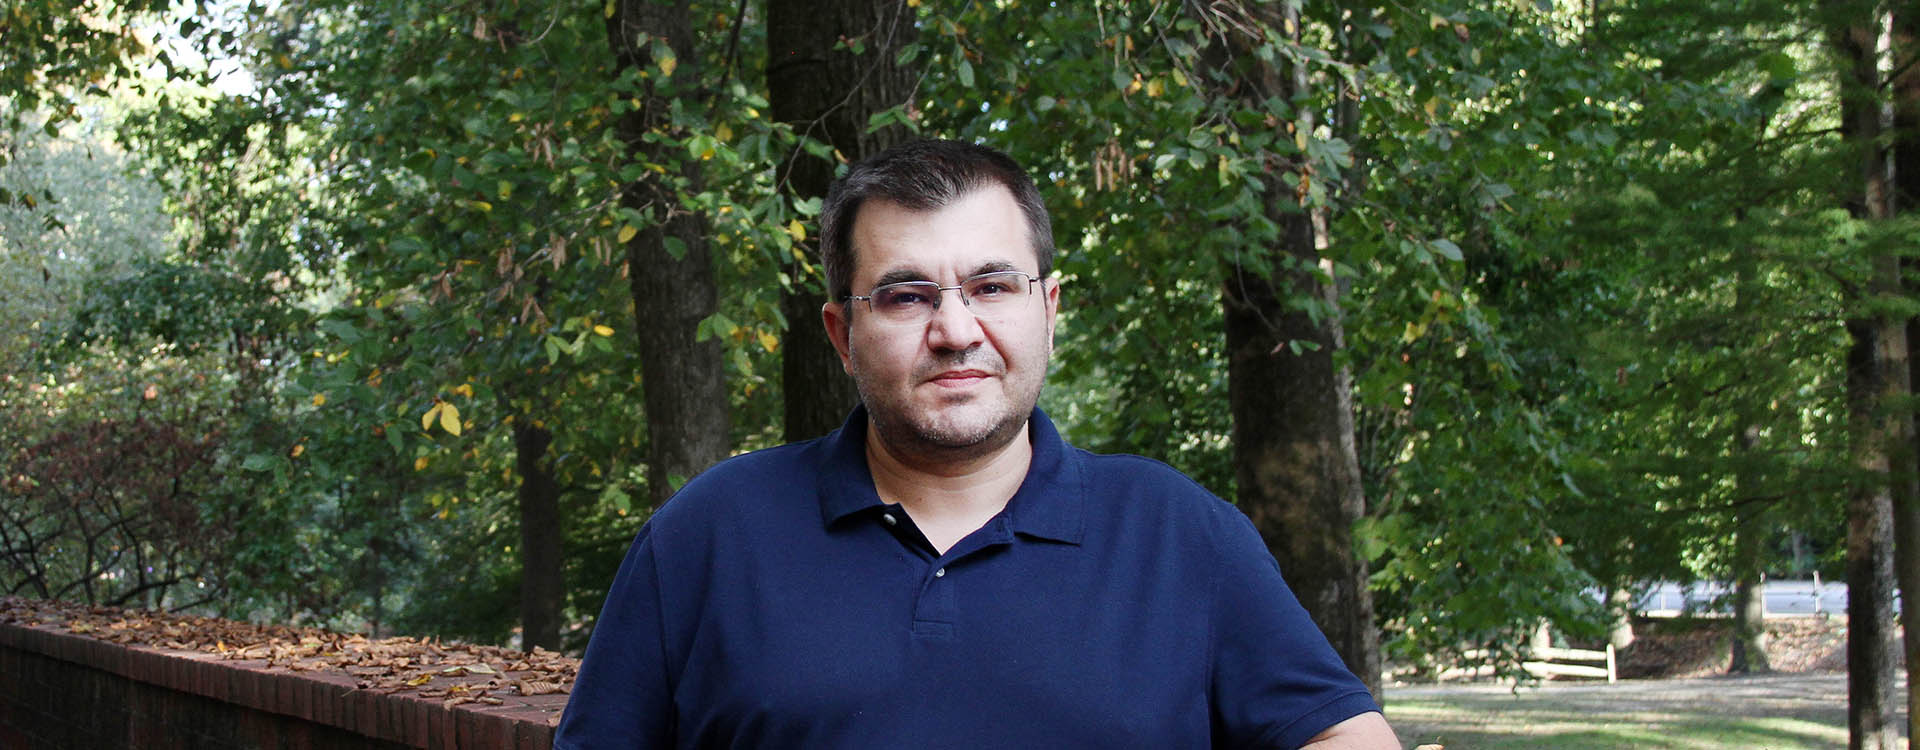 Aleksei Vilkomir is a new teaching instructor in East Carolina University’s Department of Computer Science, where his father taught for more than a decade before his death in 2020. (Photos by Ken Buday)